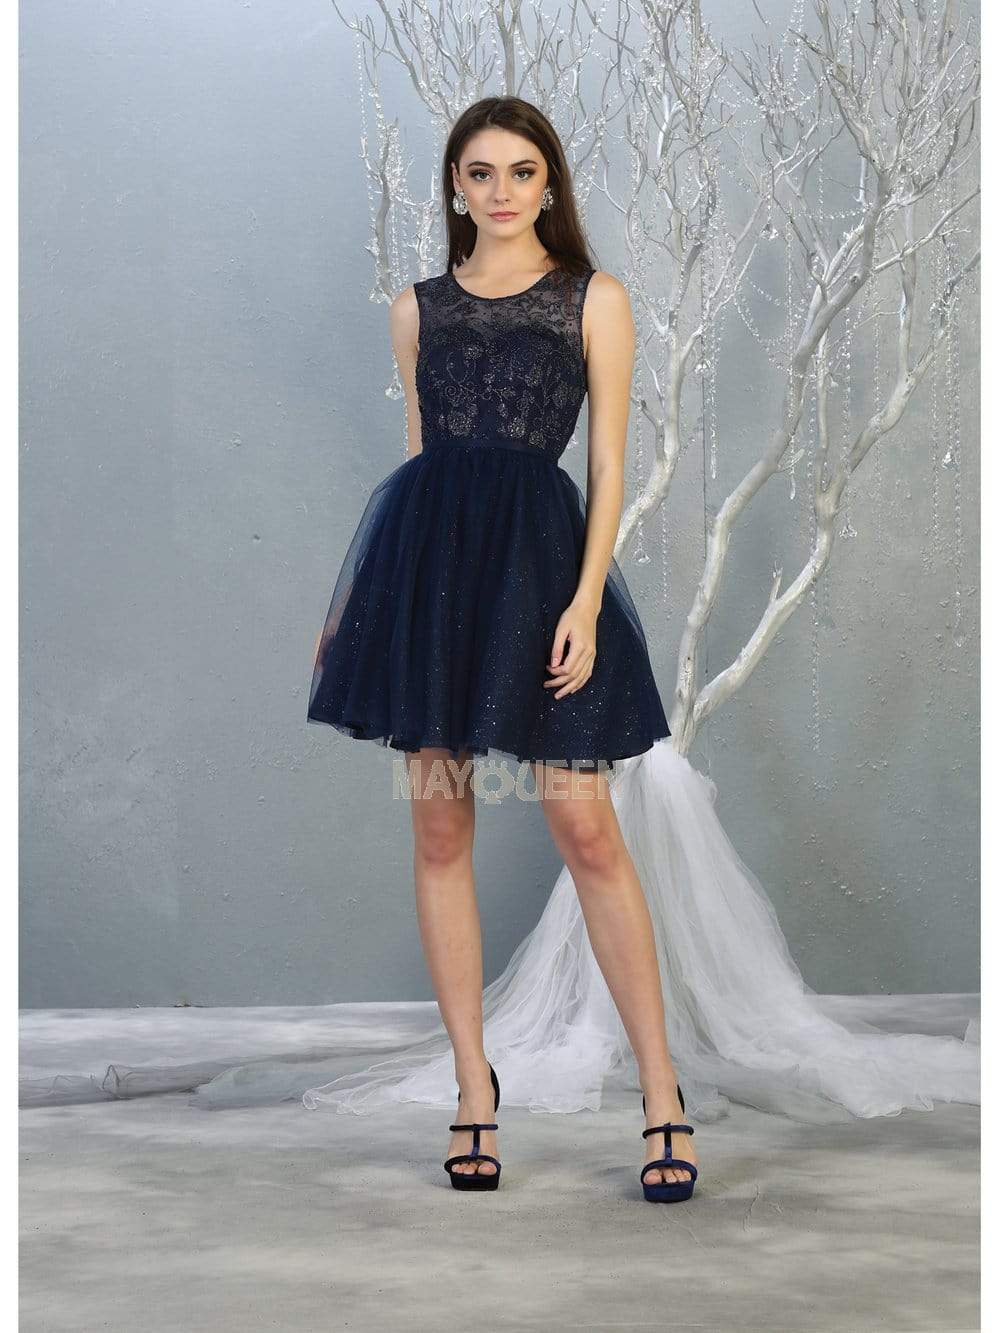 May Queen - MQ1803 Illusion Sweetheart Neckline Glitter Tulle Dress Homecoming Dresses 2 / Navy